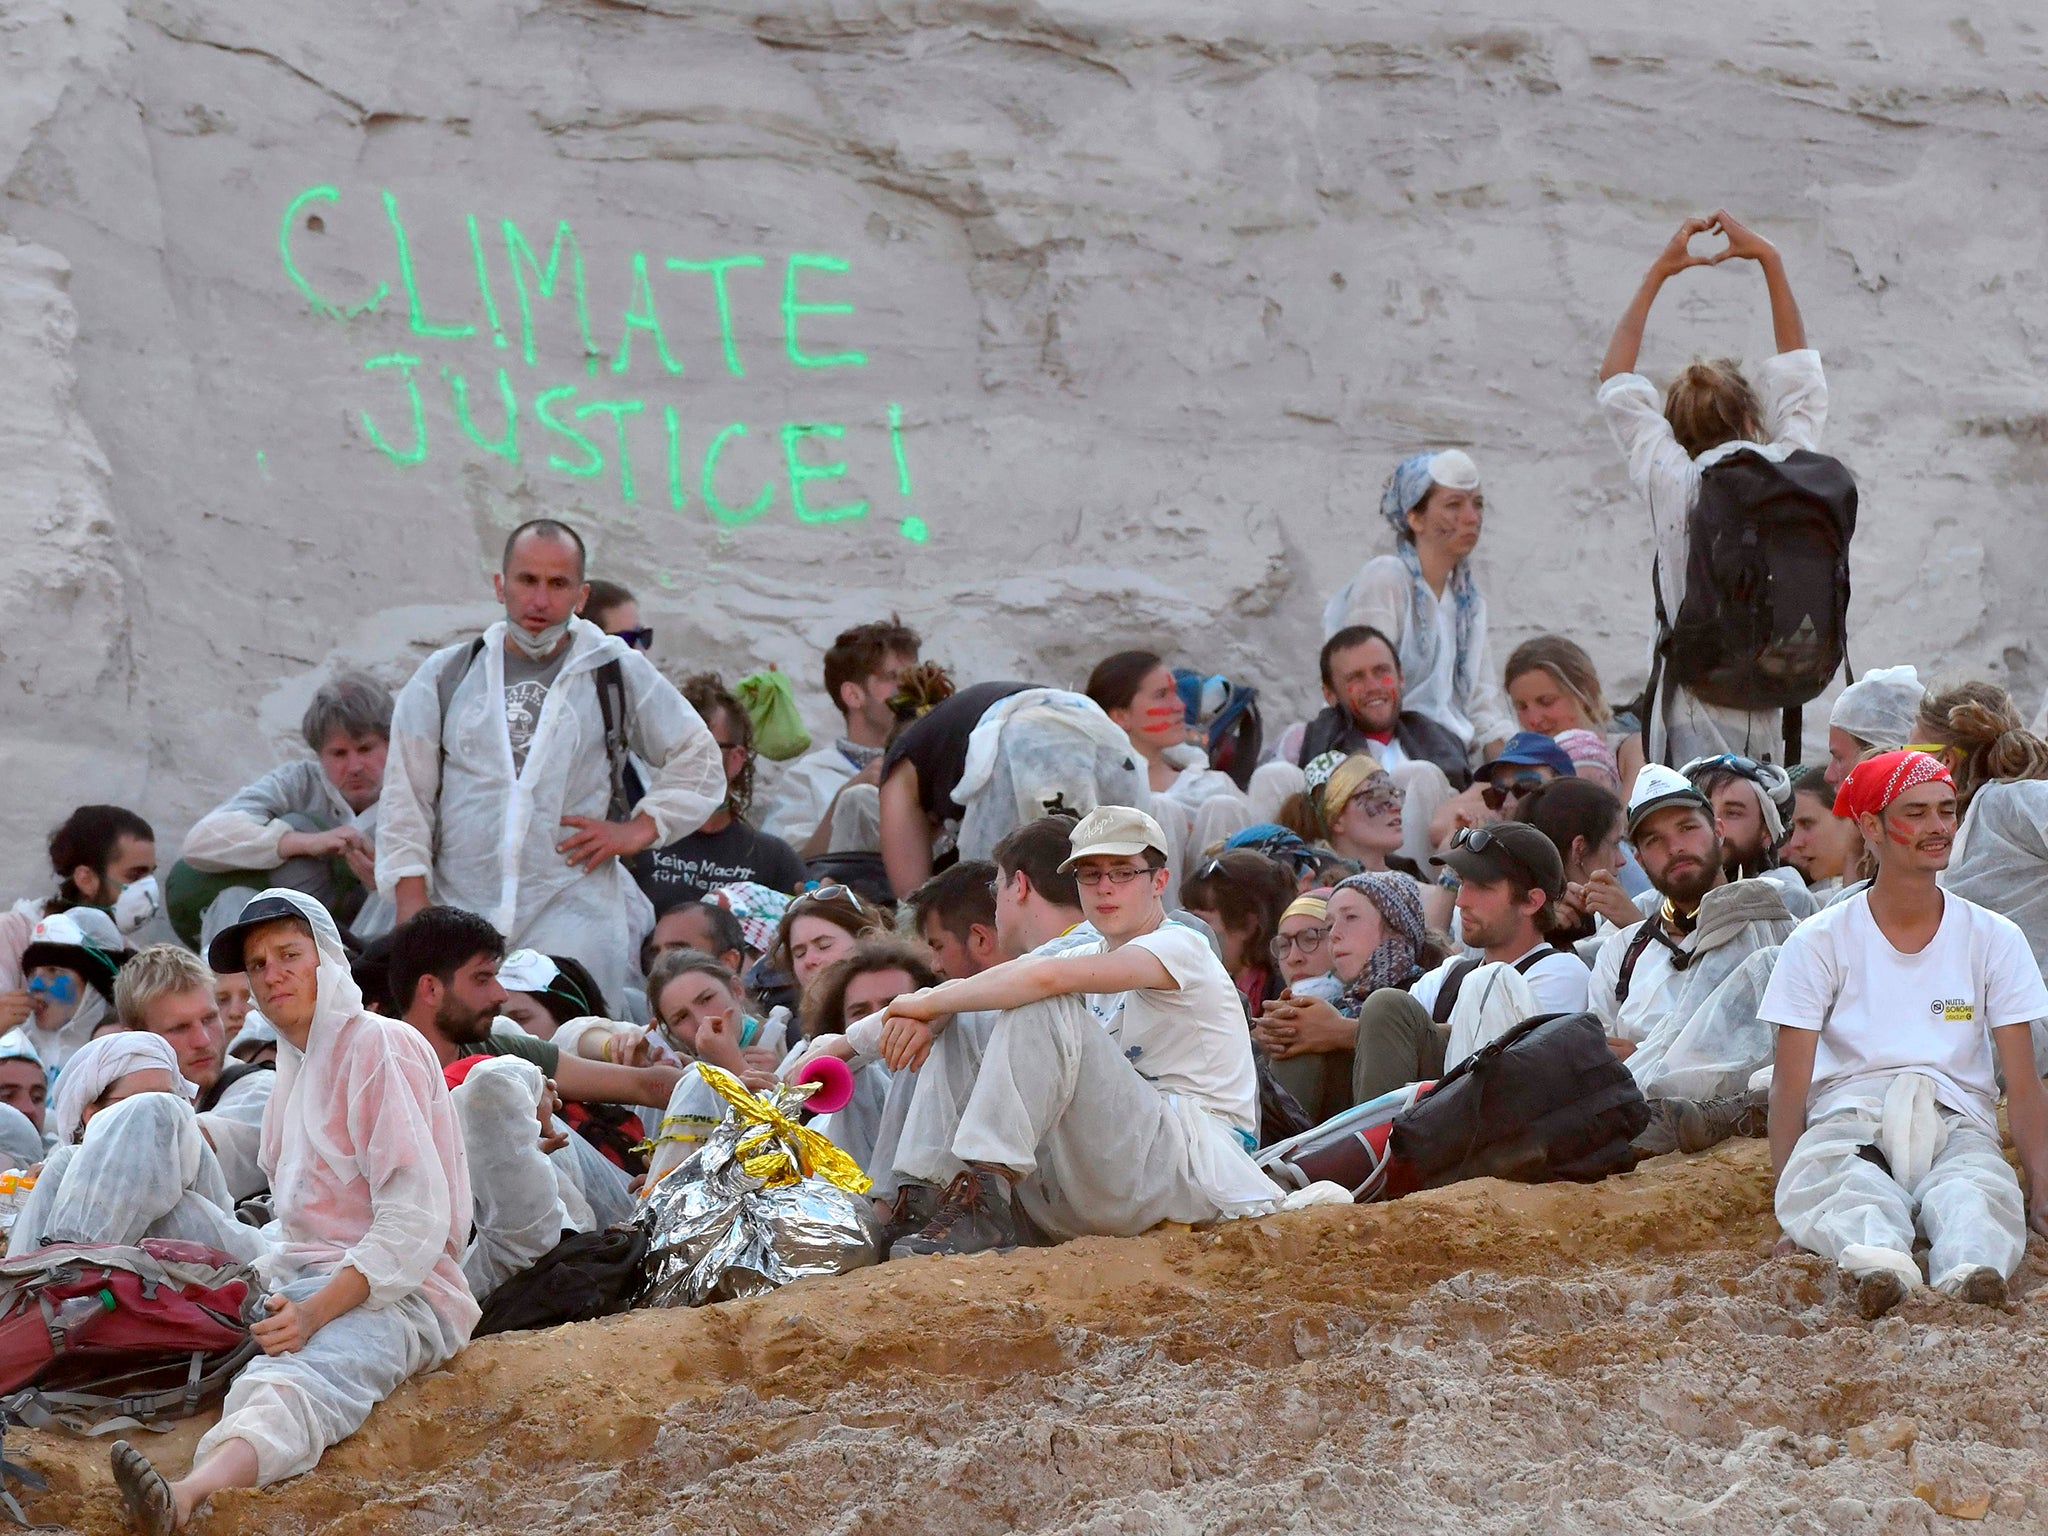 Climate activists sit on the ground after breaking through a police cordon and entering the Garzweiler coal mine in western Germany